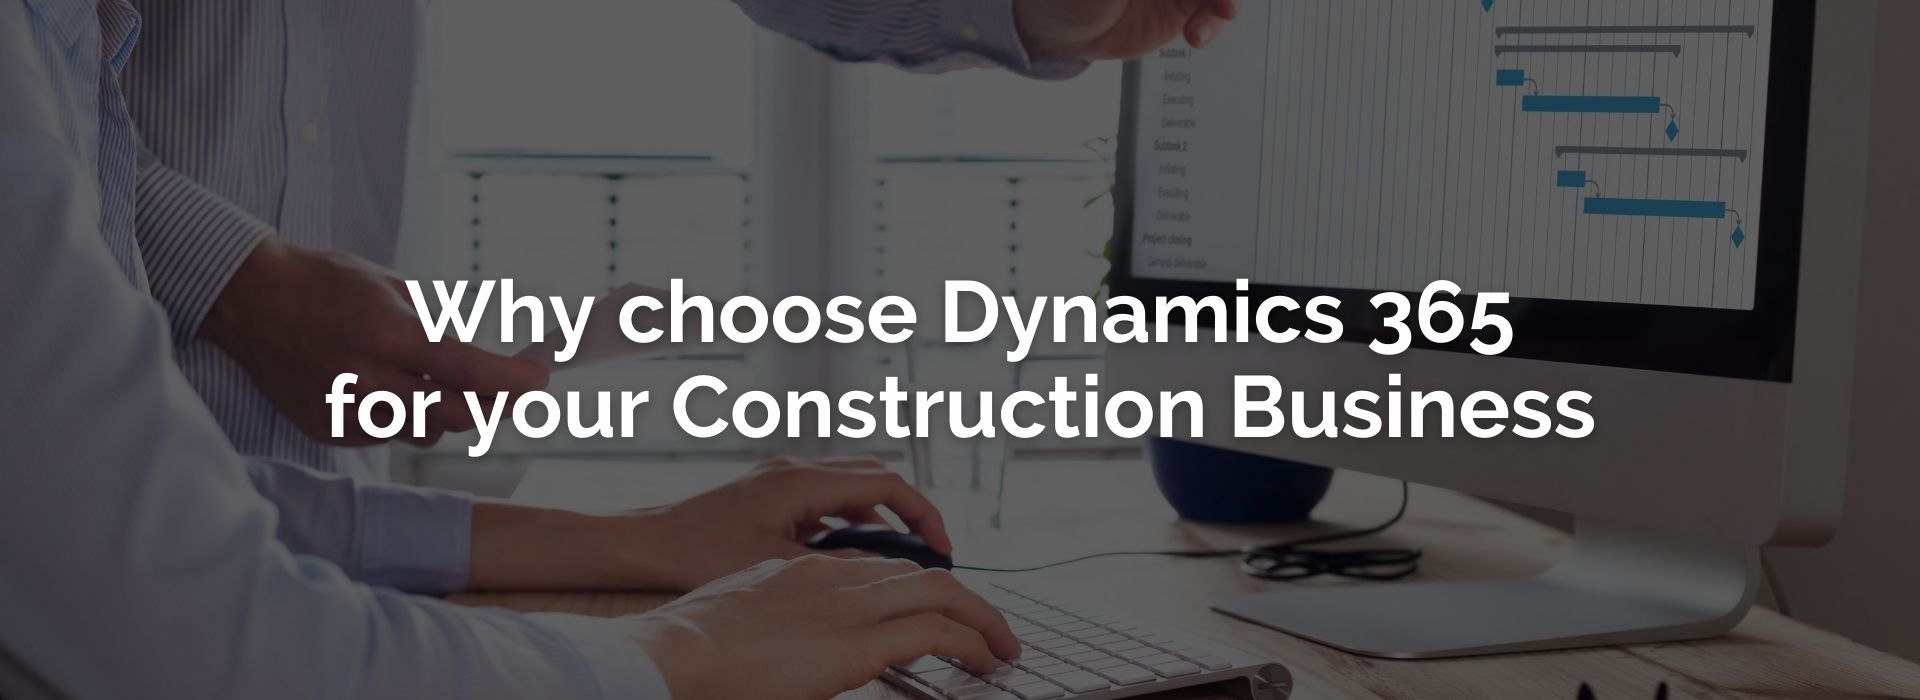 12 Reasons To Use Microsoft Dynamics 365 for Construction